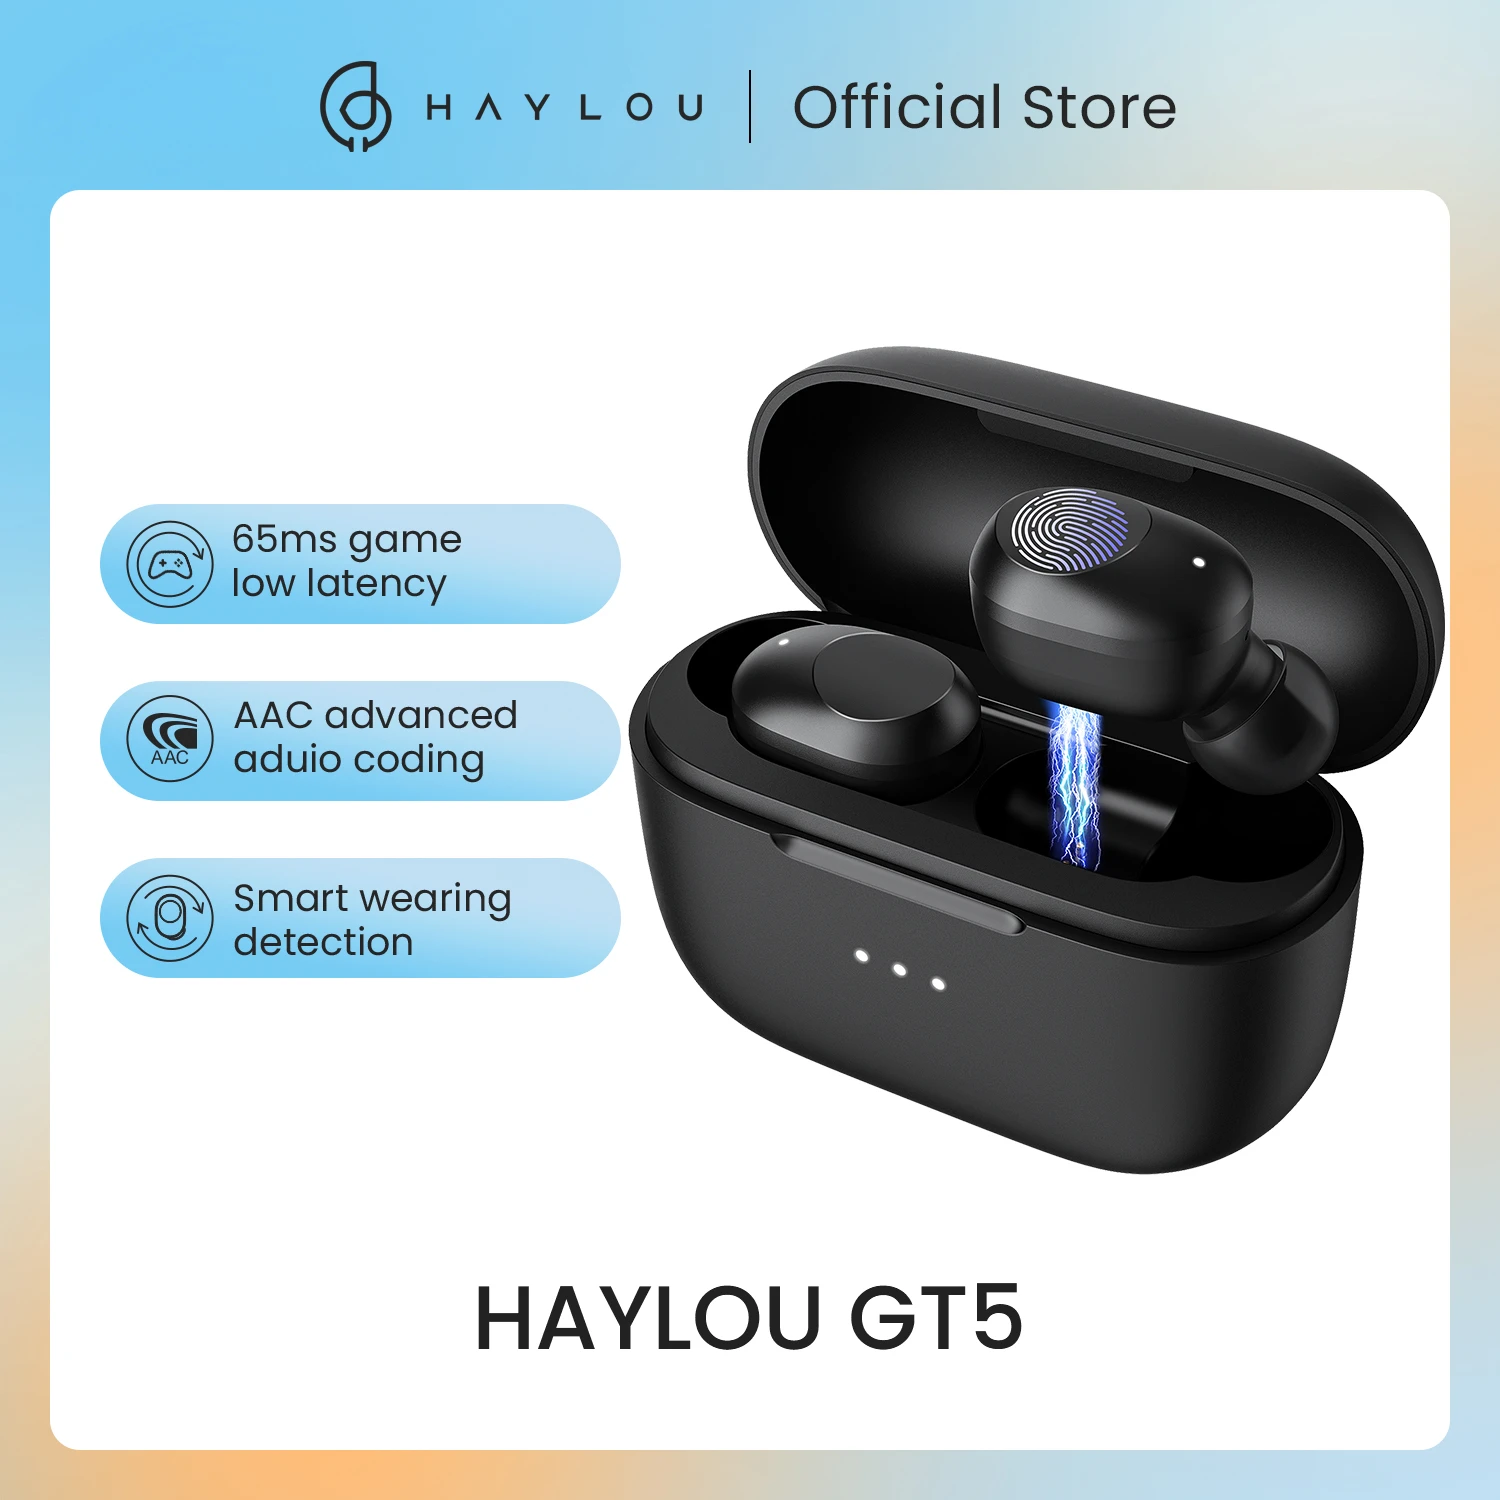 Touch Control Haylou GT5 Wireless Charging Bluetooth Earphones AAC HD Stereo Sound,Smart Wearing Detection, 24hr battery life